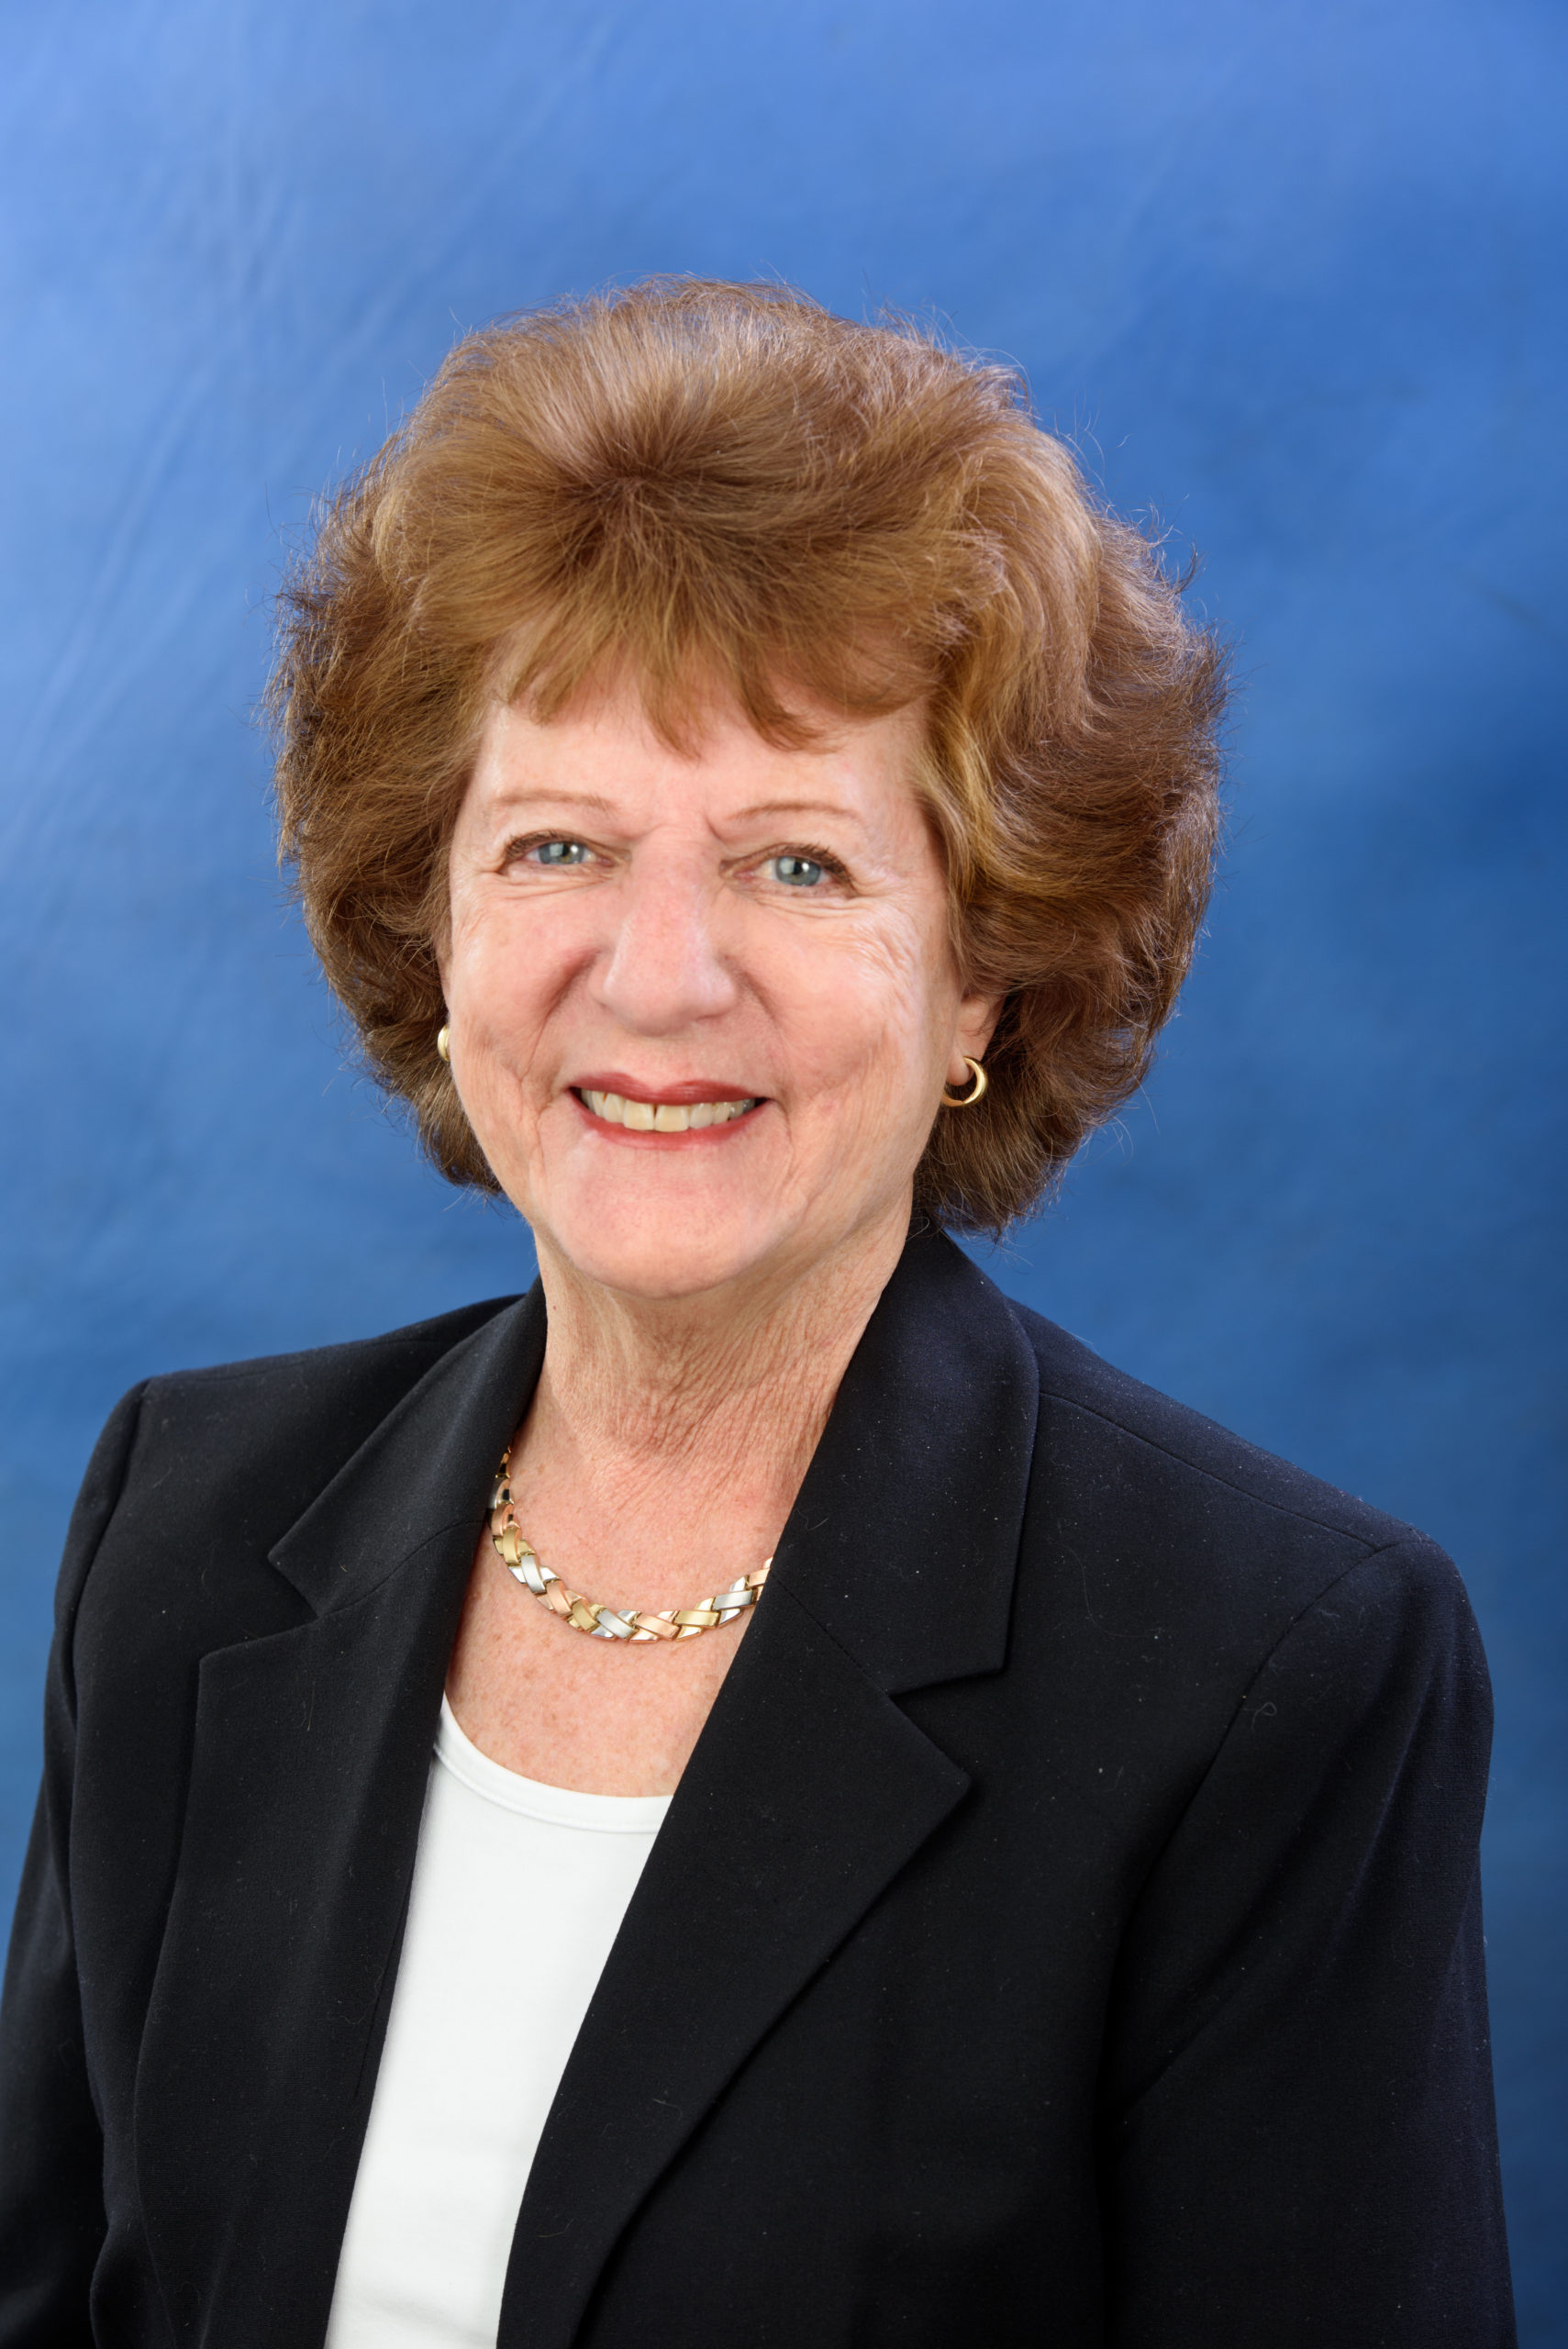 Linda Burghardt, Scholar-in-Residence at the Holocaust Memorial & Tolerance Center of Nassau County, will present a Yom HaShoah program on May 1 in Great Neck.